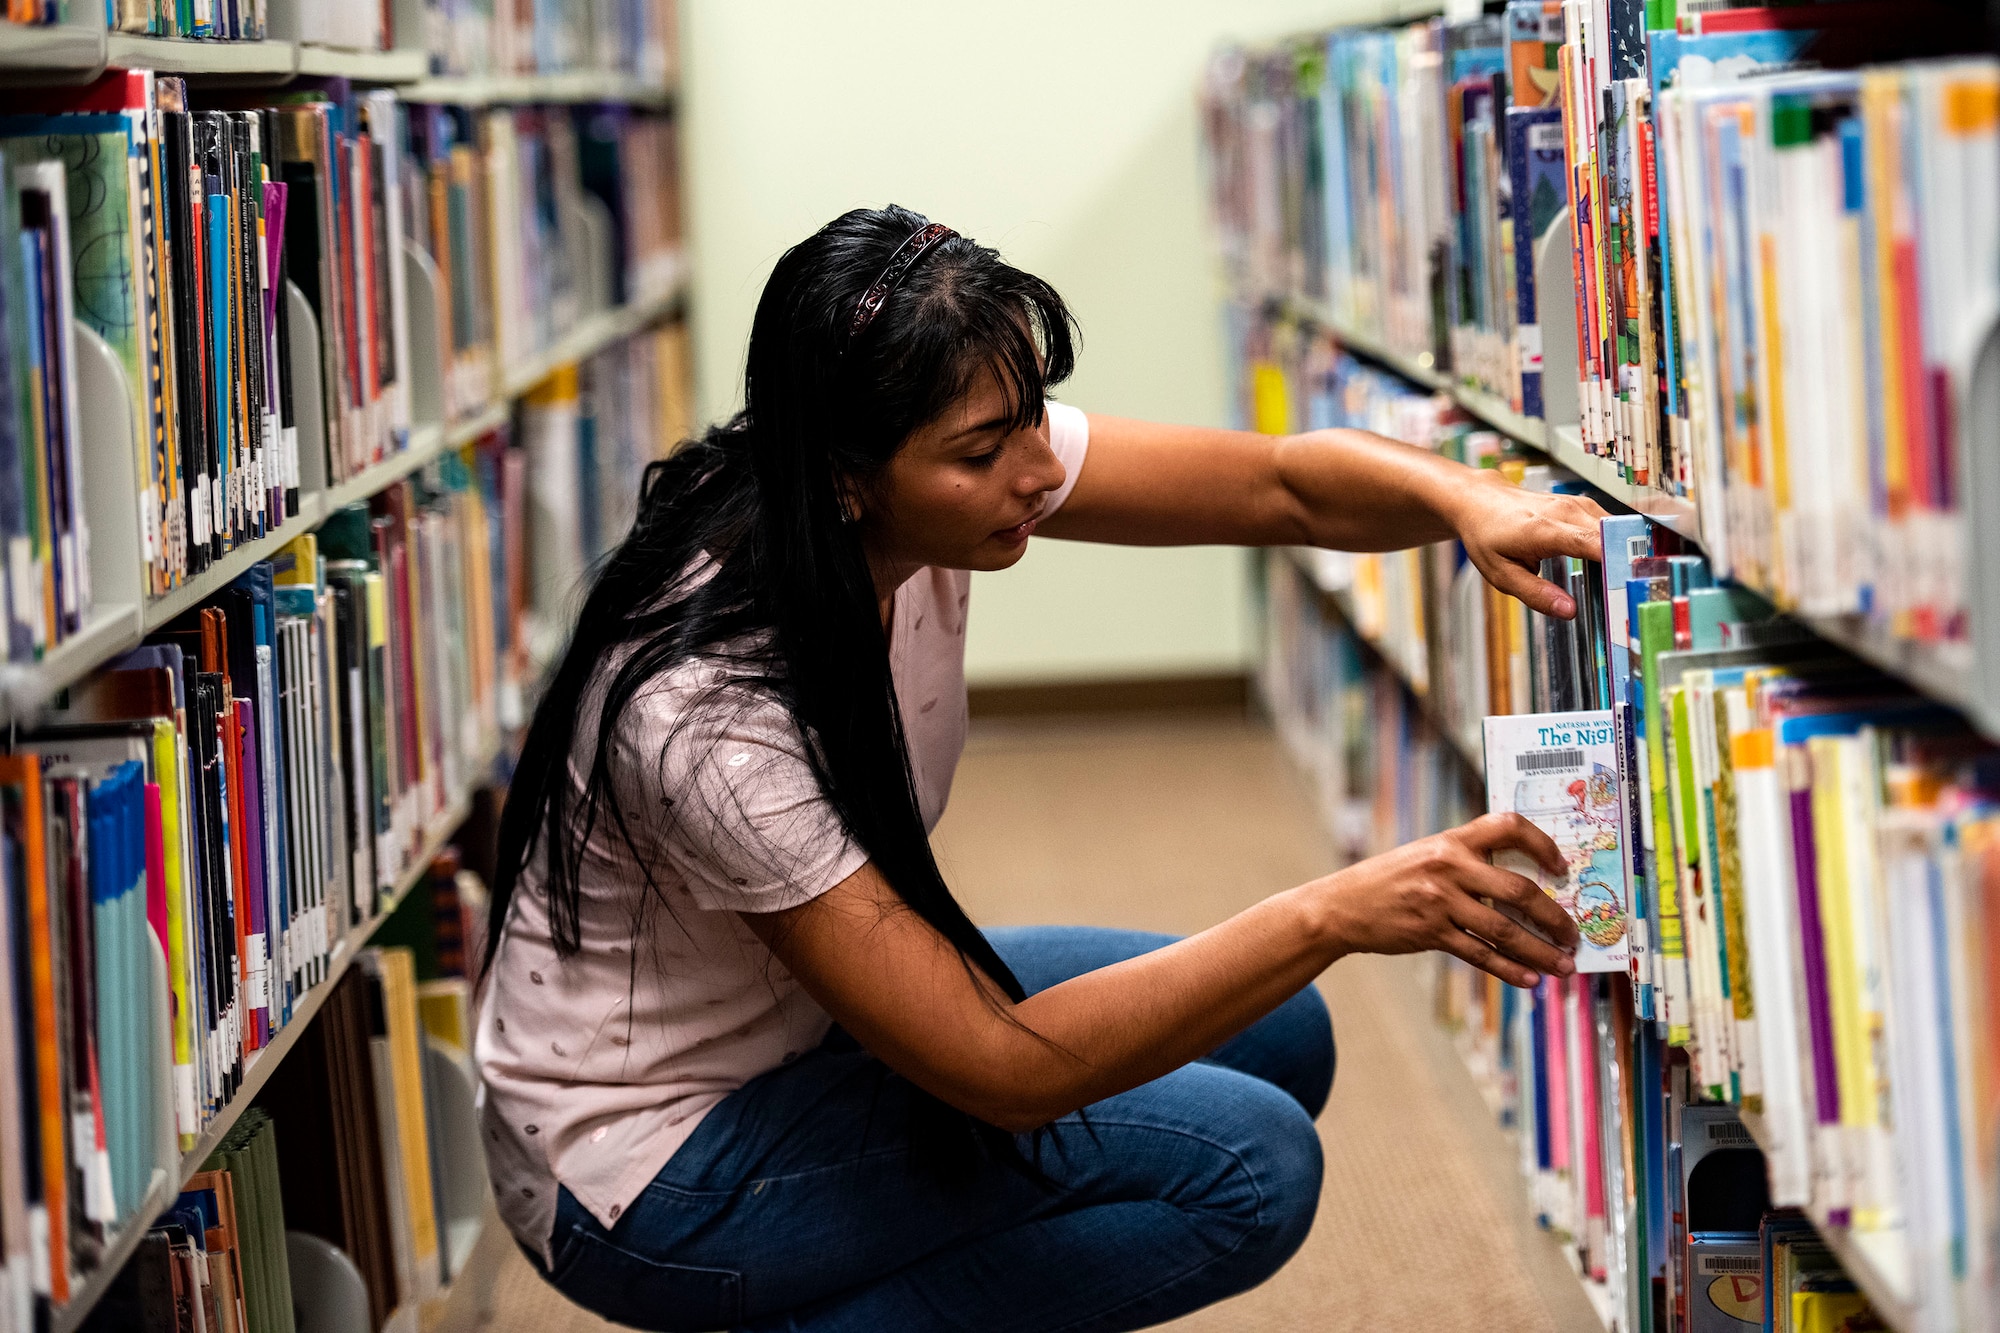 Yoselin Kilpatrick, 23d Force Support Squadron library aid, returns a book Sept. 5, 2019, at Moody Air Force Base, Ga. With more than 10k books available at the library, it’s just one of the many benefits at the Information Learning Center available to Airmen and families. (U.S. Air Force photo by Senior Airman Erick Requadt)